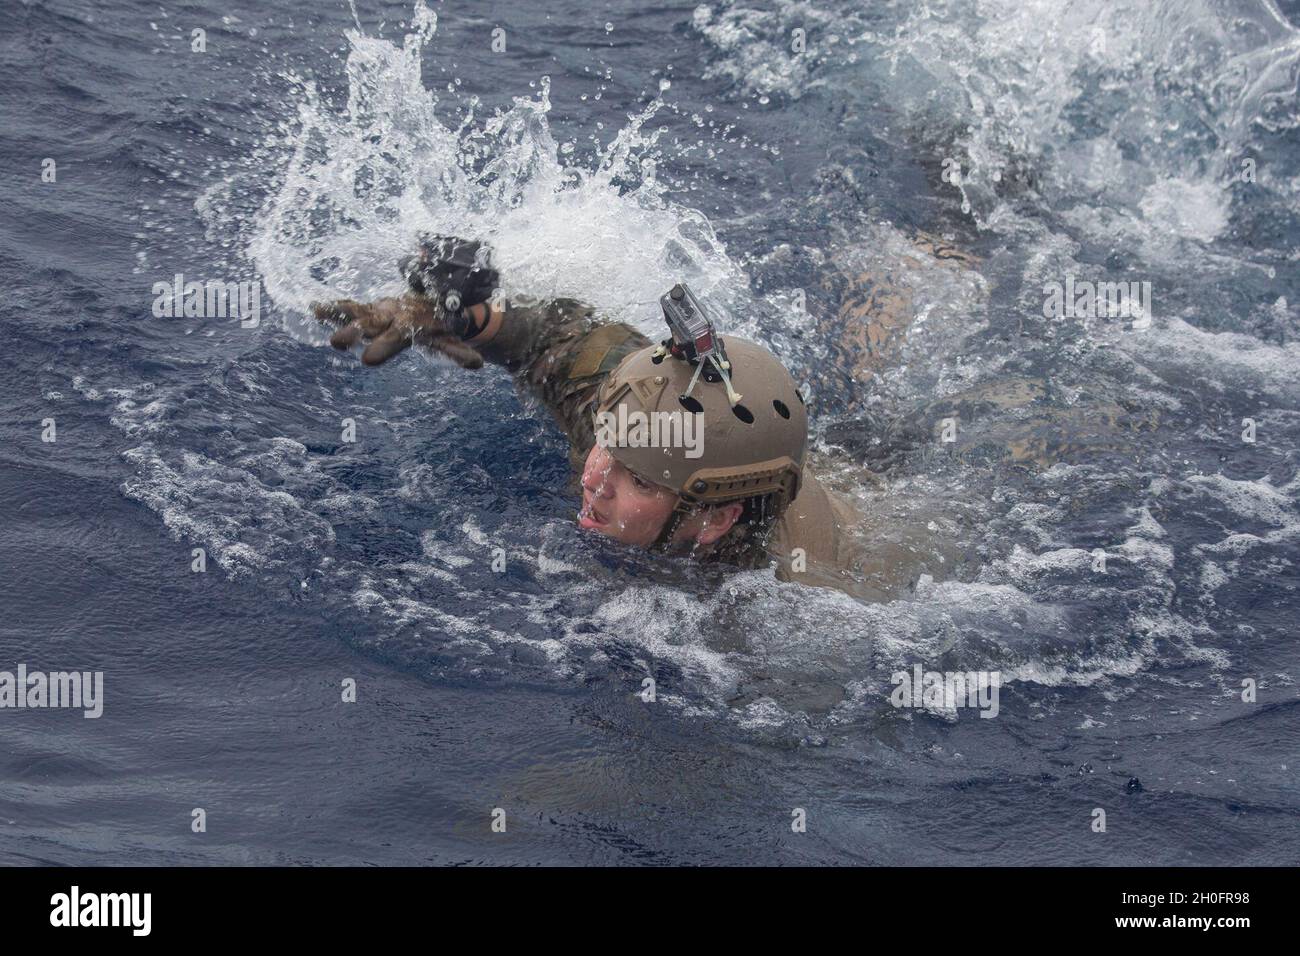 U.S. Navy Explosive Ordnance Disposal Technician 2nd Class Daniel Lemon, a native of Middletown, Connecticut, swims away from a simulated mine during mine countermeasure training in the Philippine Sea, Feb. 26, 2021. The 31st MEU is operating aboard ships of the Amphibious Squadron 11 in the 7th fleet area of operations to enhance interoperability with allies and partners and serve as a ready response force to defend peace and stability in the Indo-Pacific Region. Stock Photo